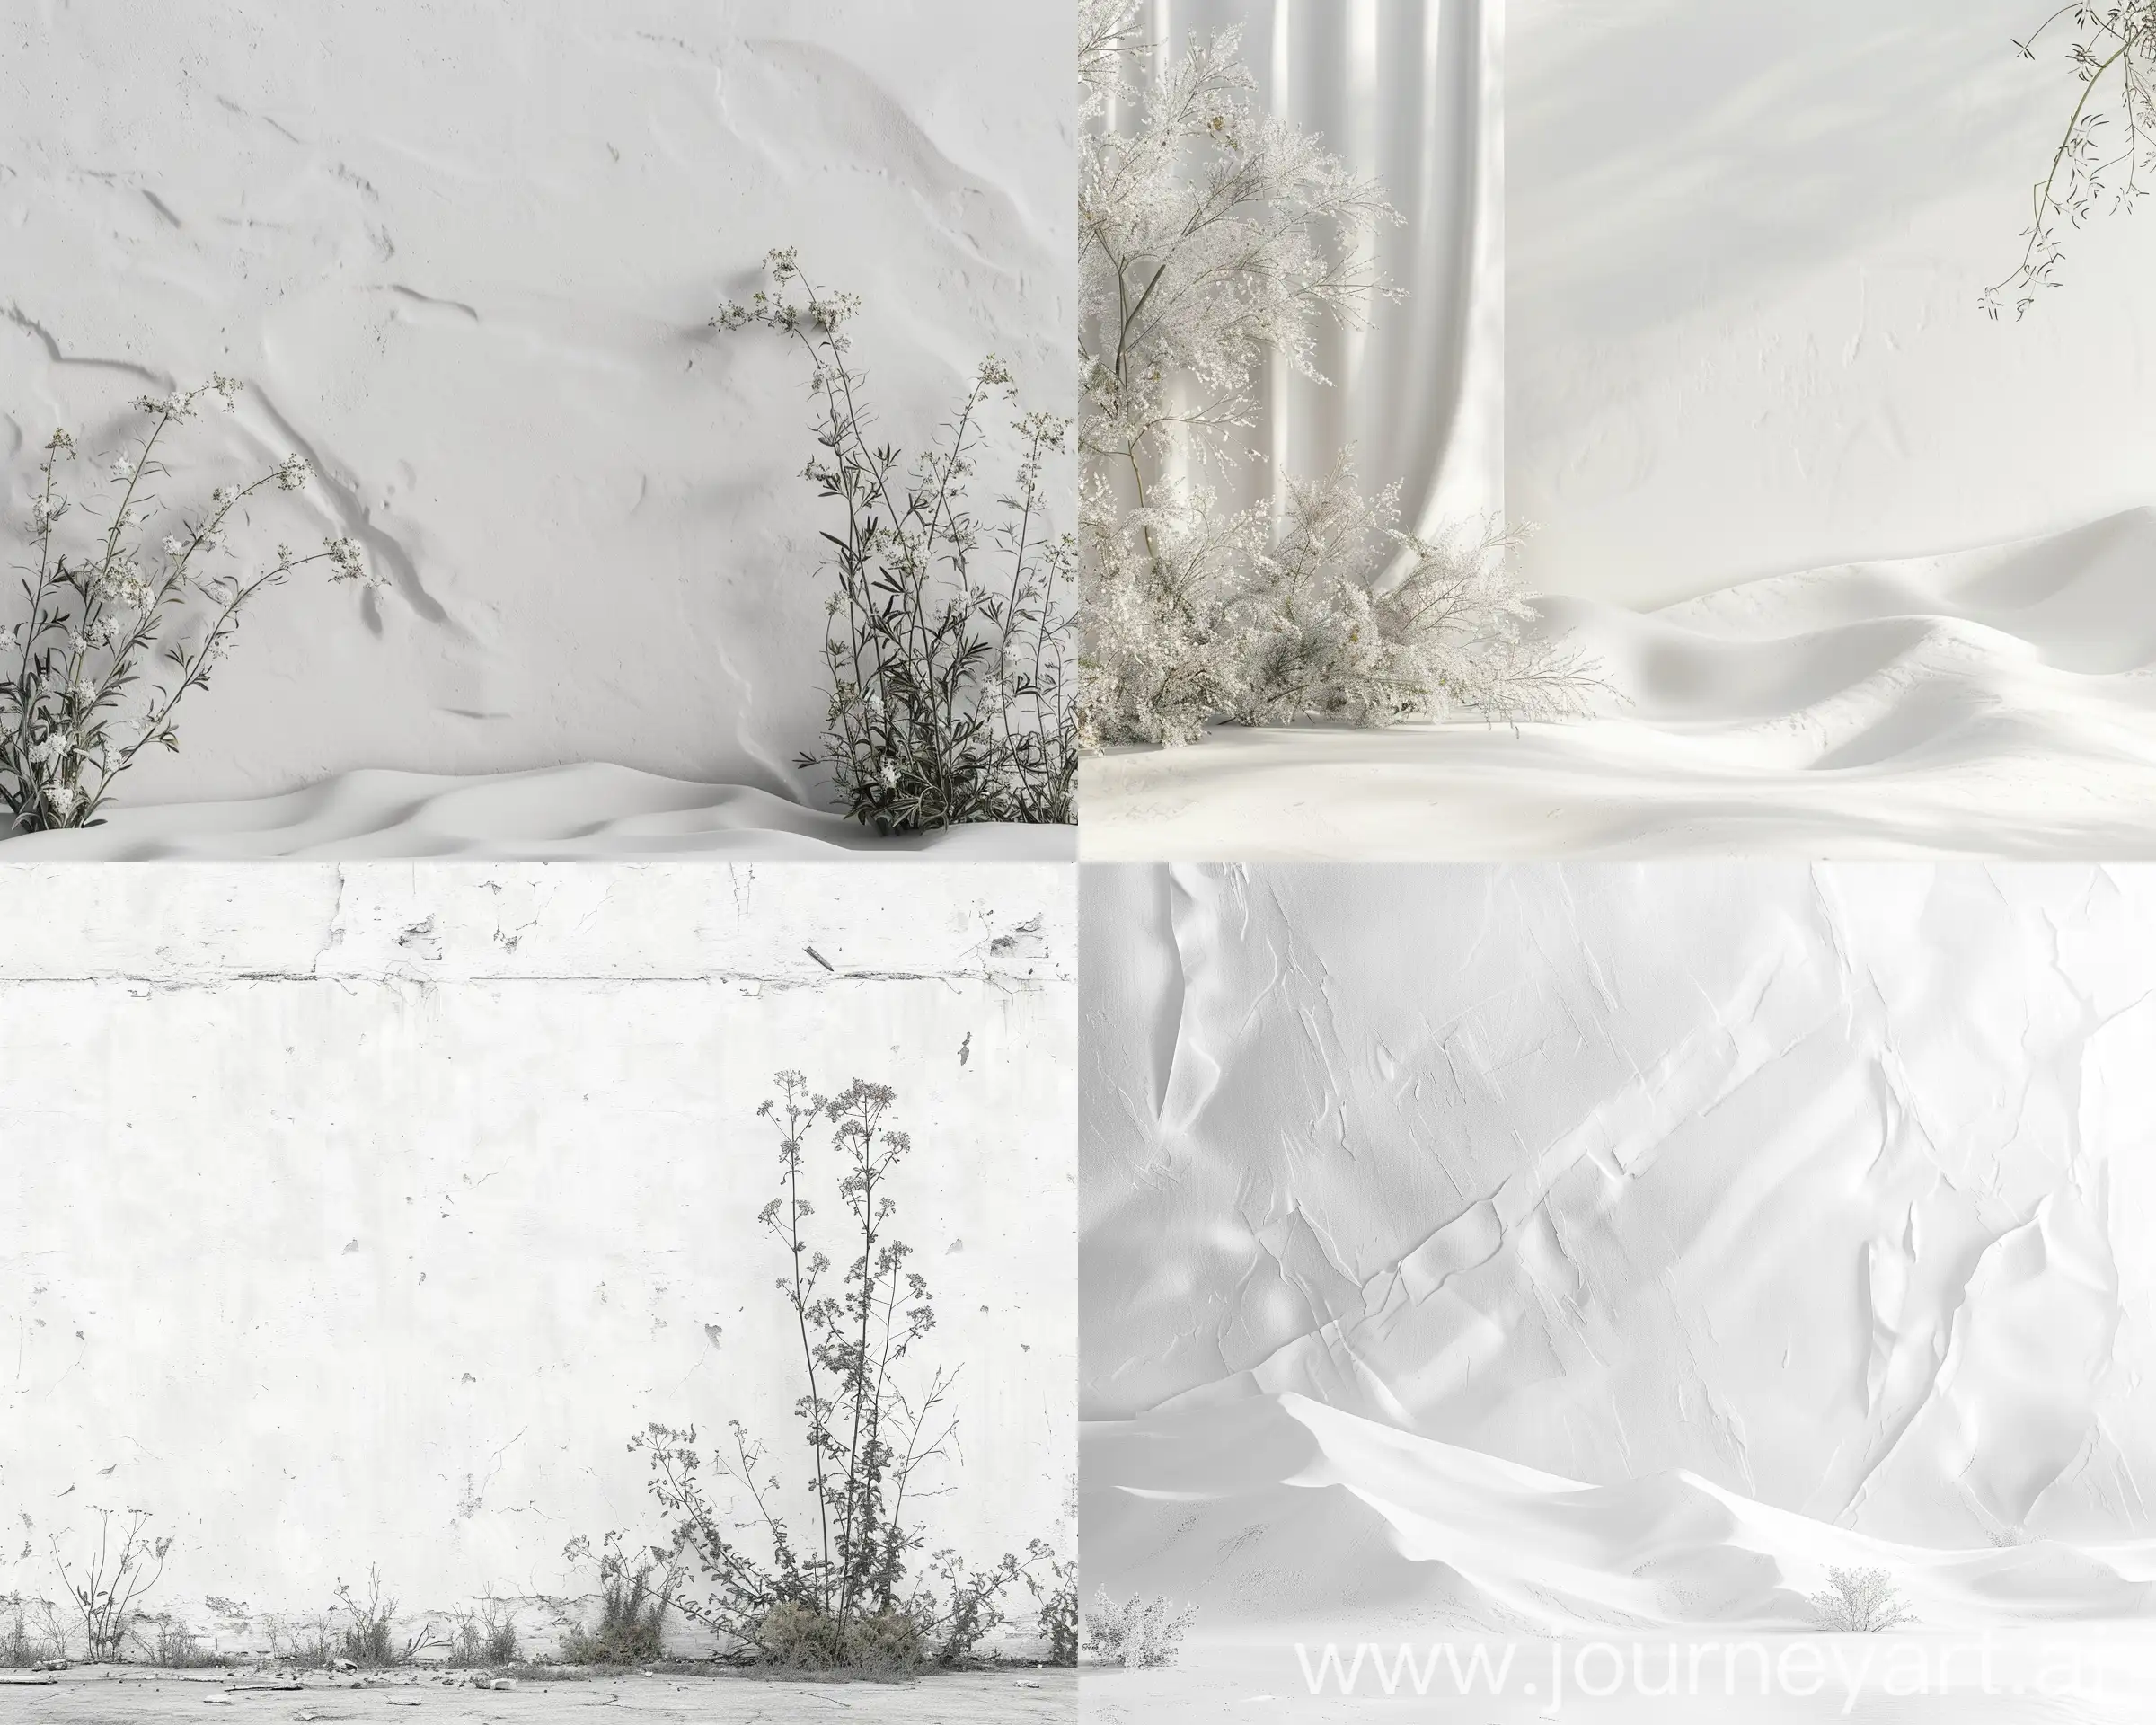 Urban-Decay-Realism-Soft-Tone-White-Wall-Texture-with-Desert-Wave-and-Floral-Punk-Elements